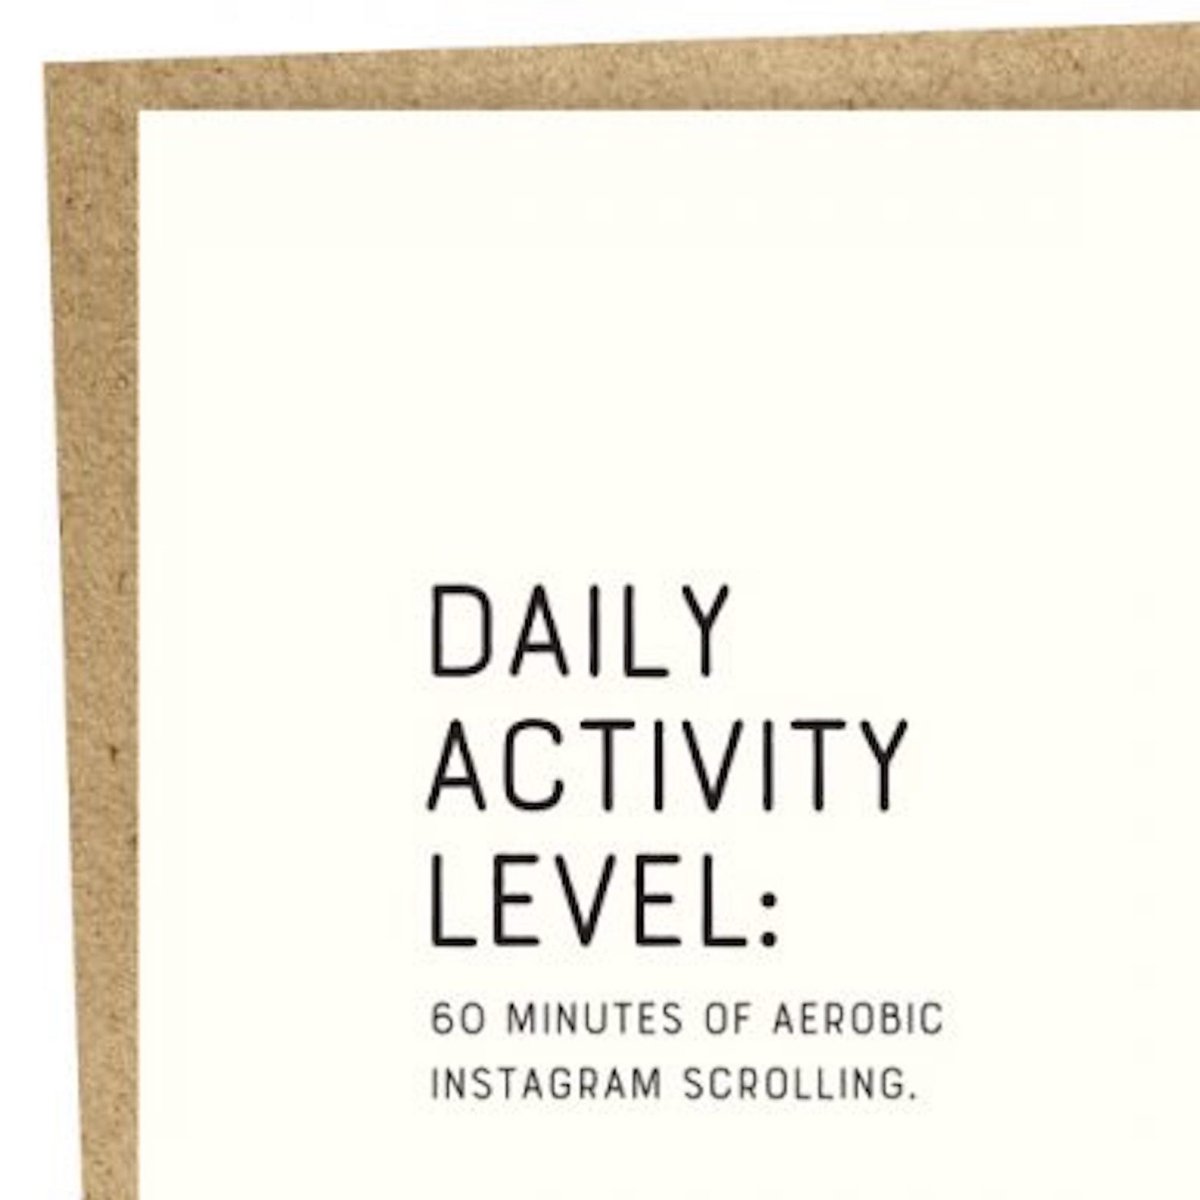 Kraft card with black text that reads: "DAILY ACTIVITY LEVEL: 60 MINUTES OF AEROBIC INSTGRAM SCROLLING." Comes with a brown Kraft envelope. Designed by Sapling Press and printed in Pittsburgh, PA.